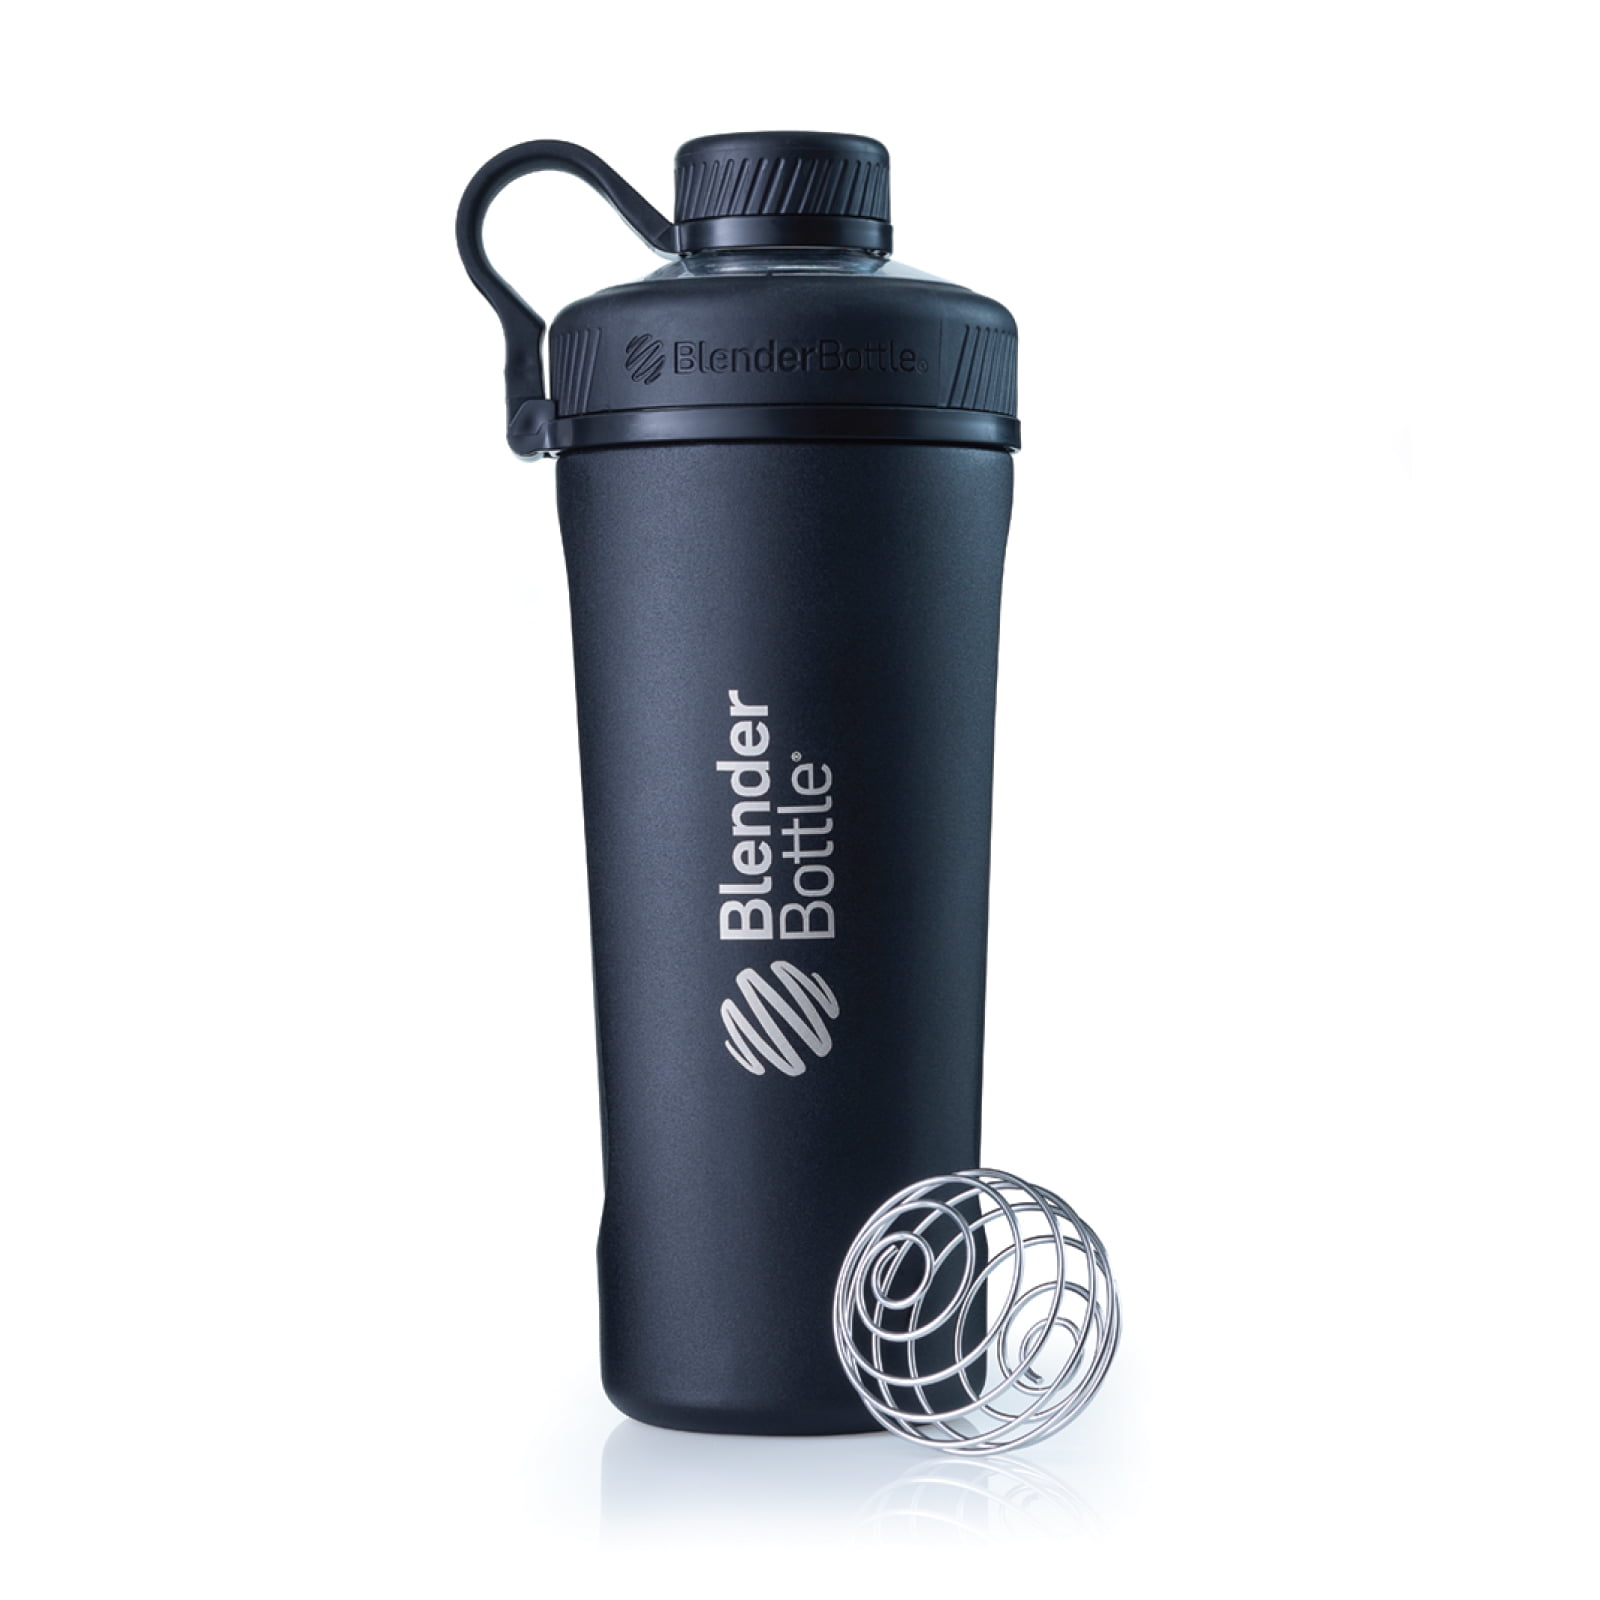 BlenderBottle Radian 26 oz White Solid Print Insulated Shaker Cup with Wide  Mouth and Screw Cap 